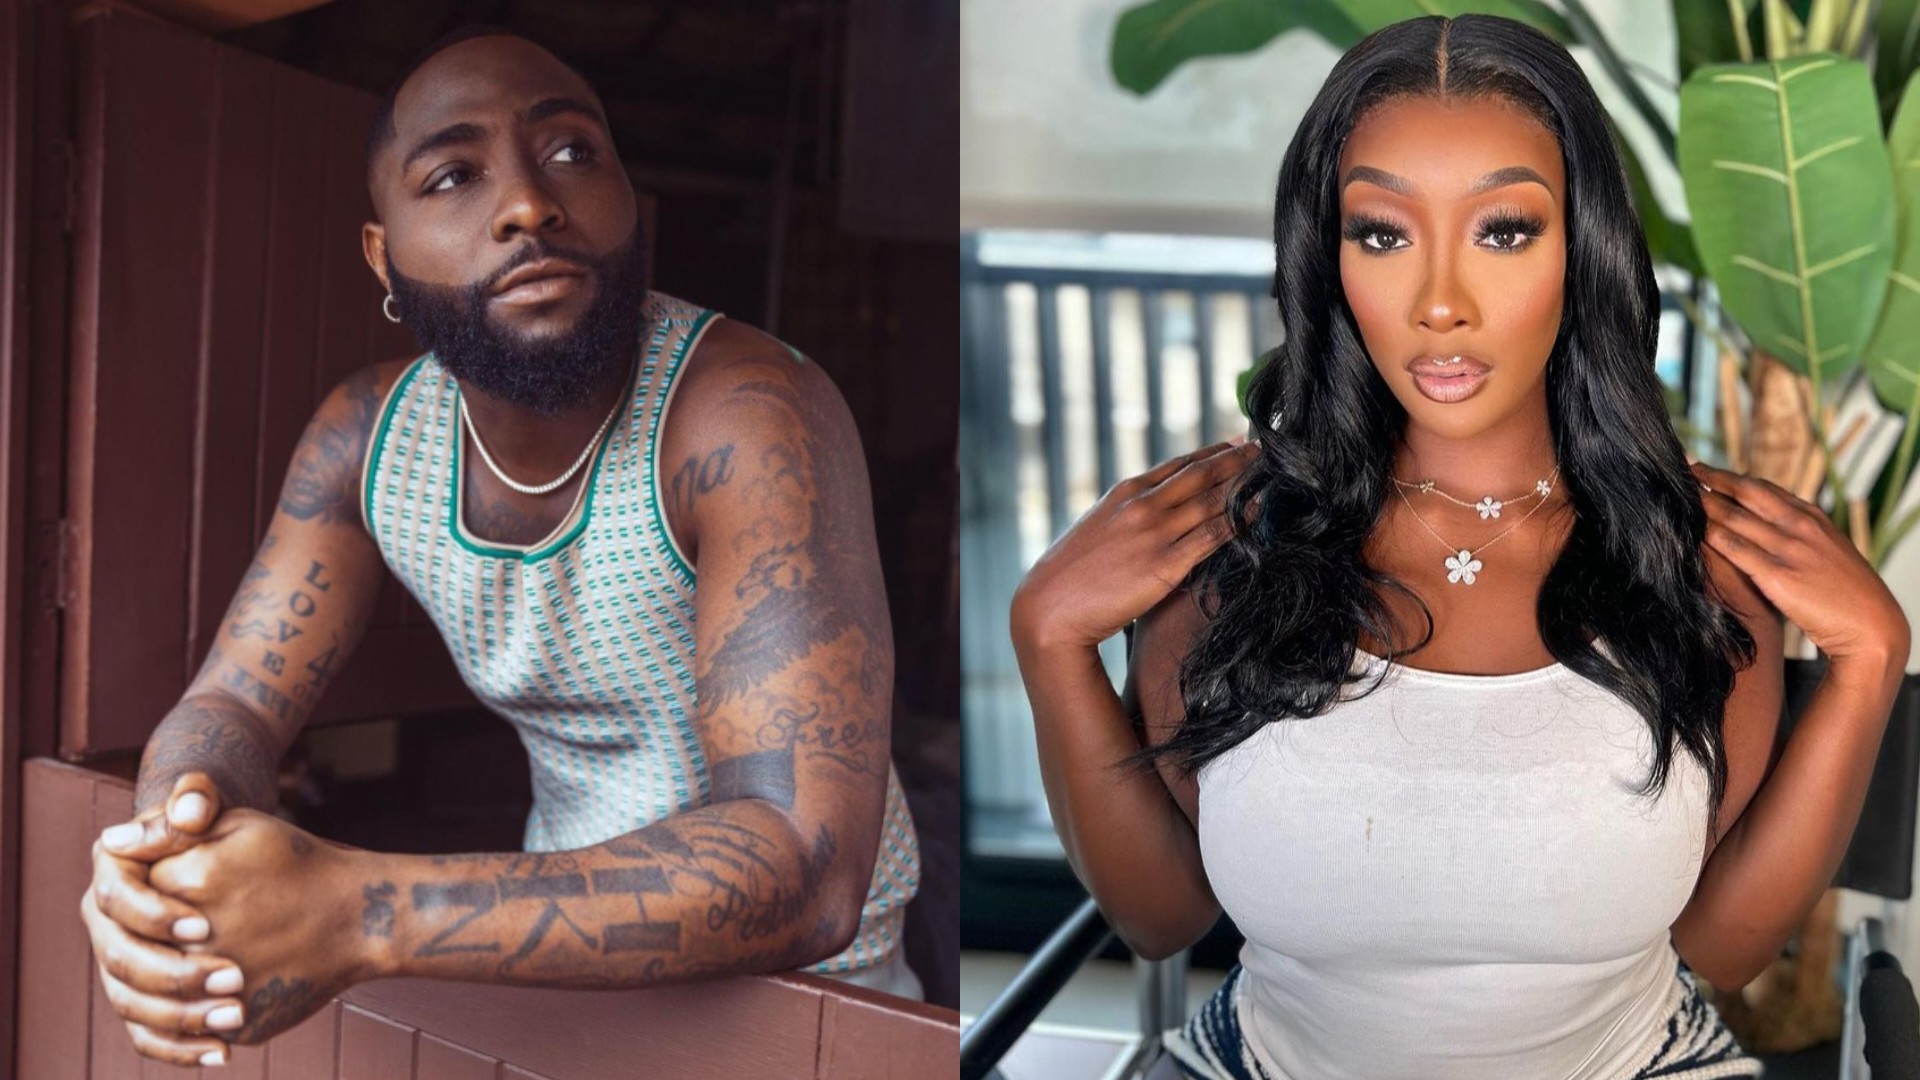 Davido’s alleged side chick exposed over fake pregnancy scan